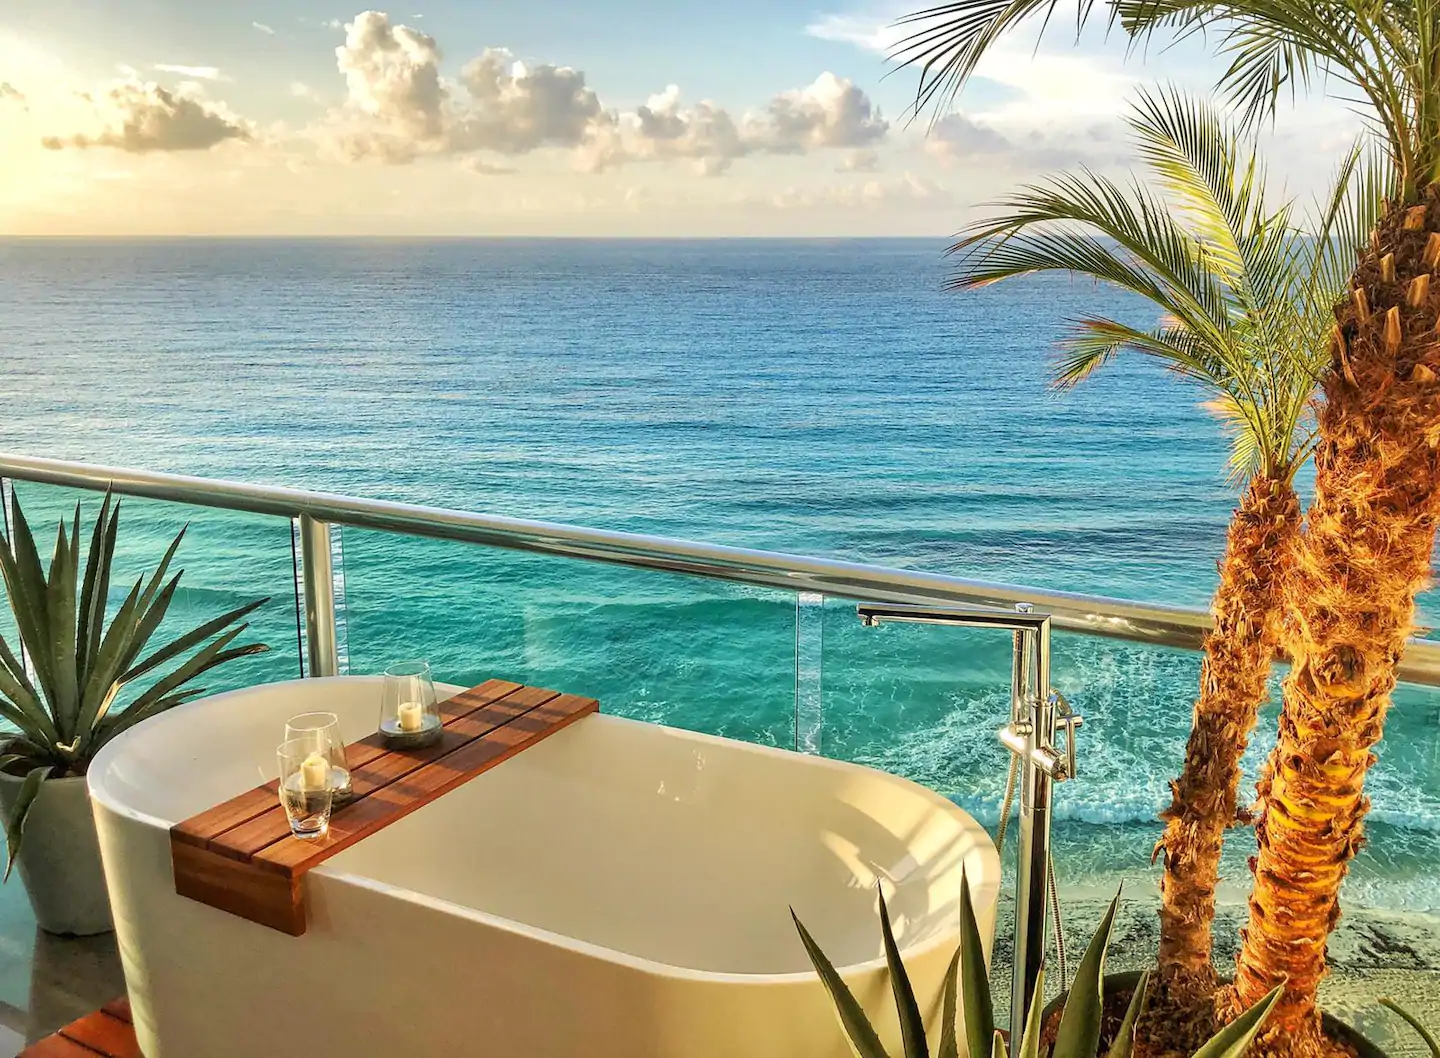 The view from an epic outdoor bathtub surrounded by plants with an ocean view The Quarry is one of the most luxurious Airbnbs in Cancun!